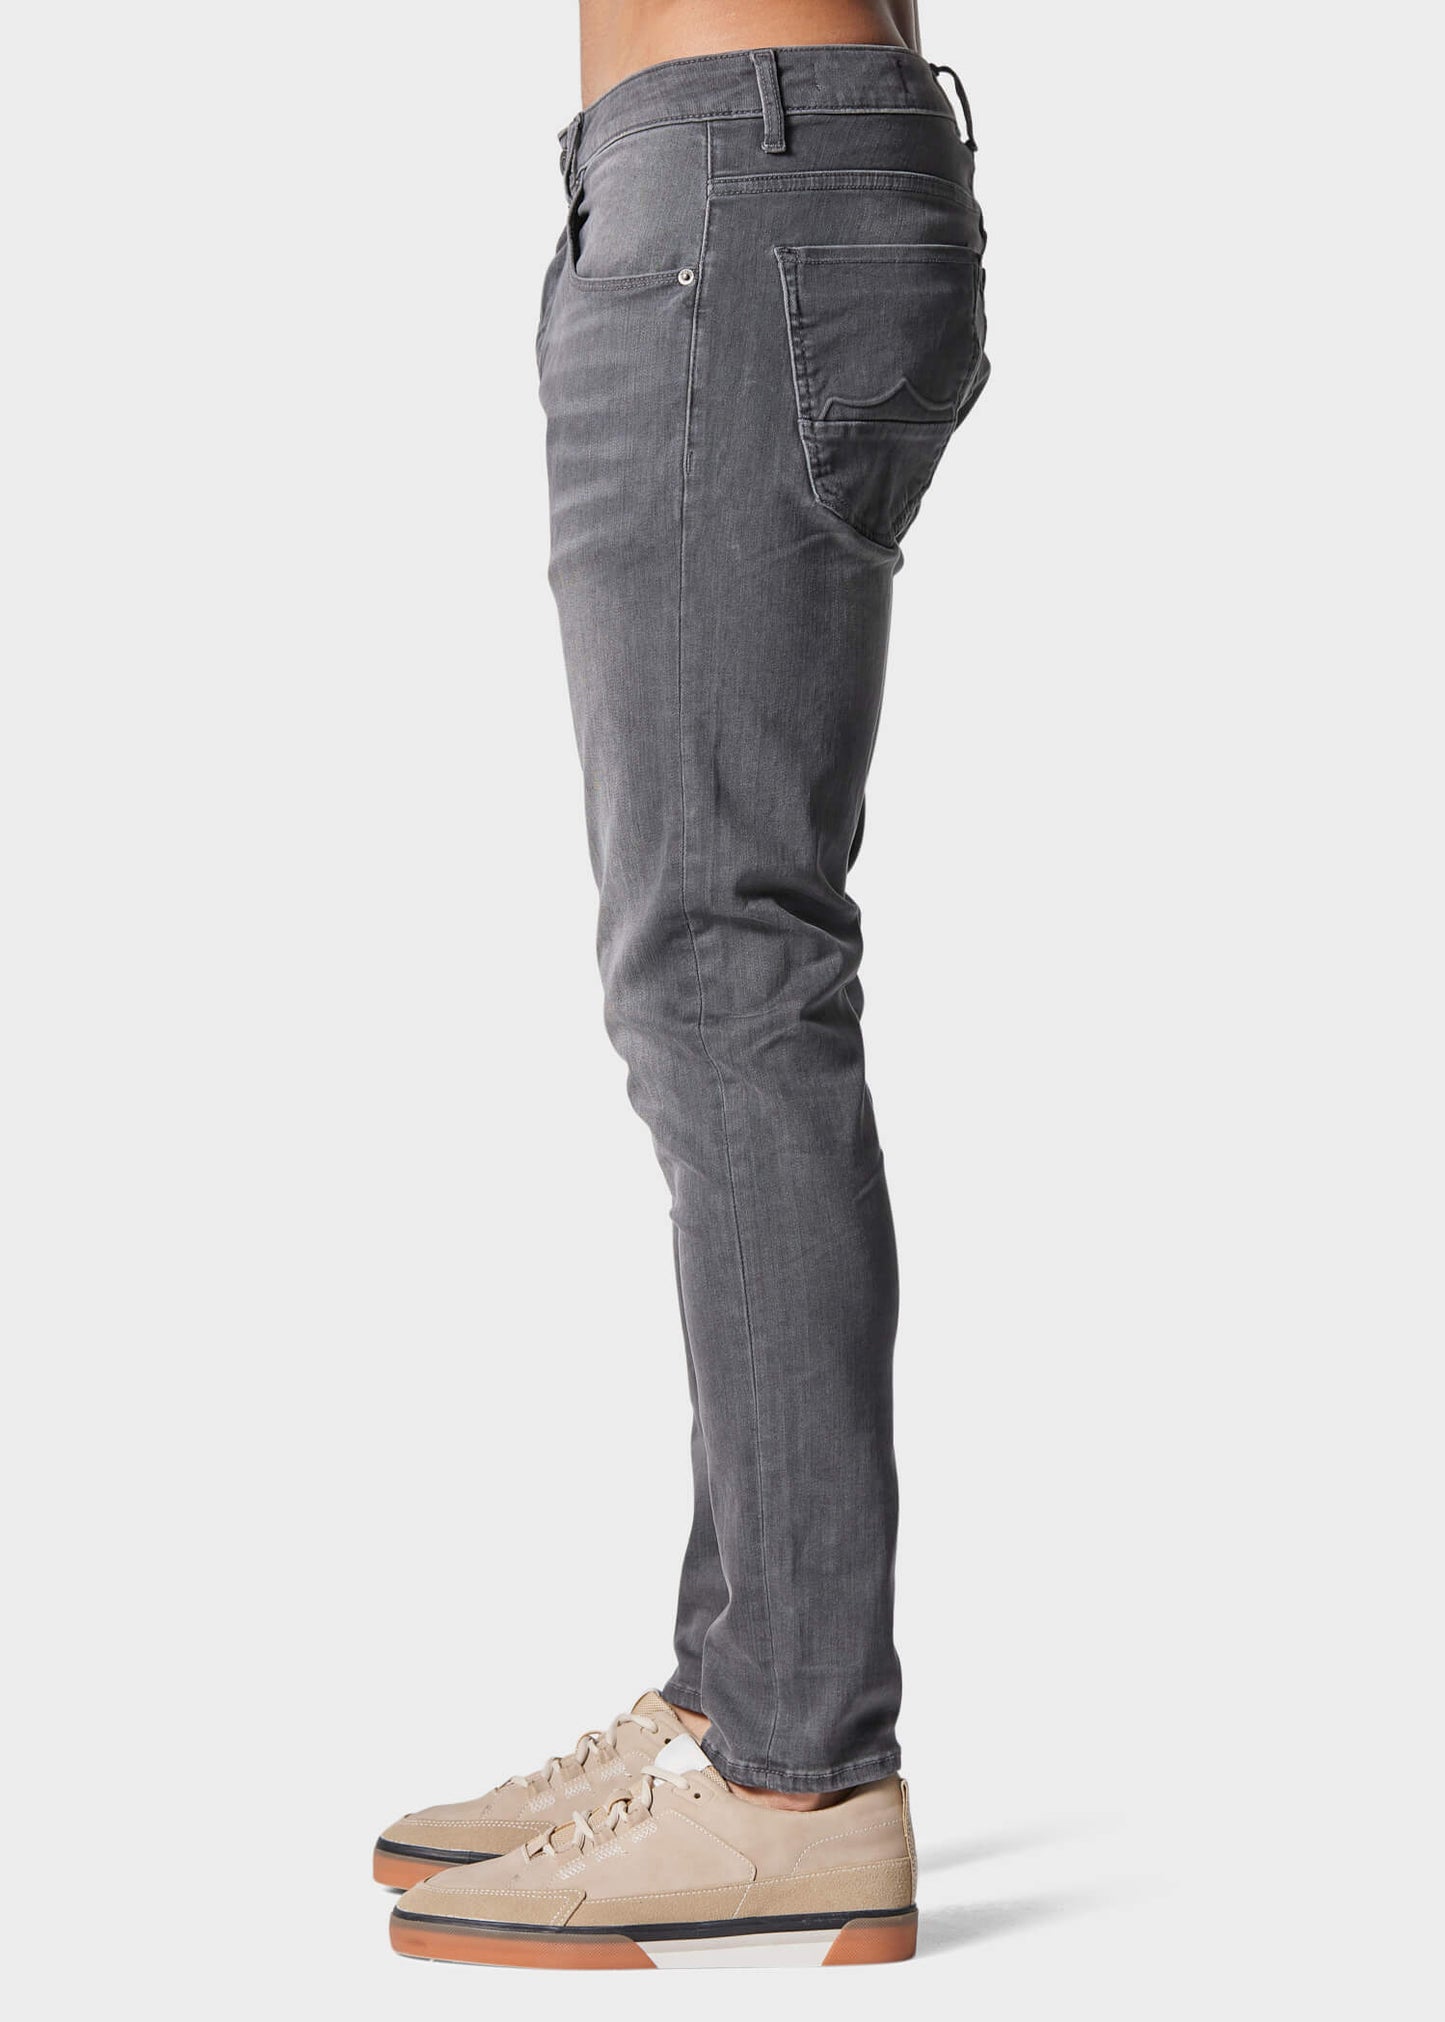 Moriarty LAK 917 Slim Fit Jeans